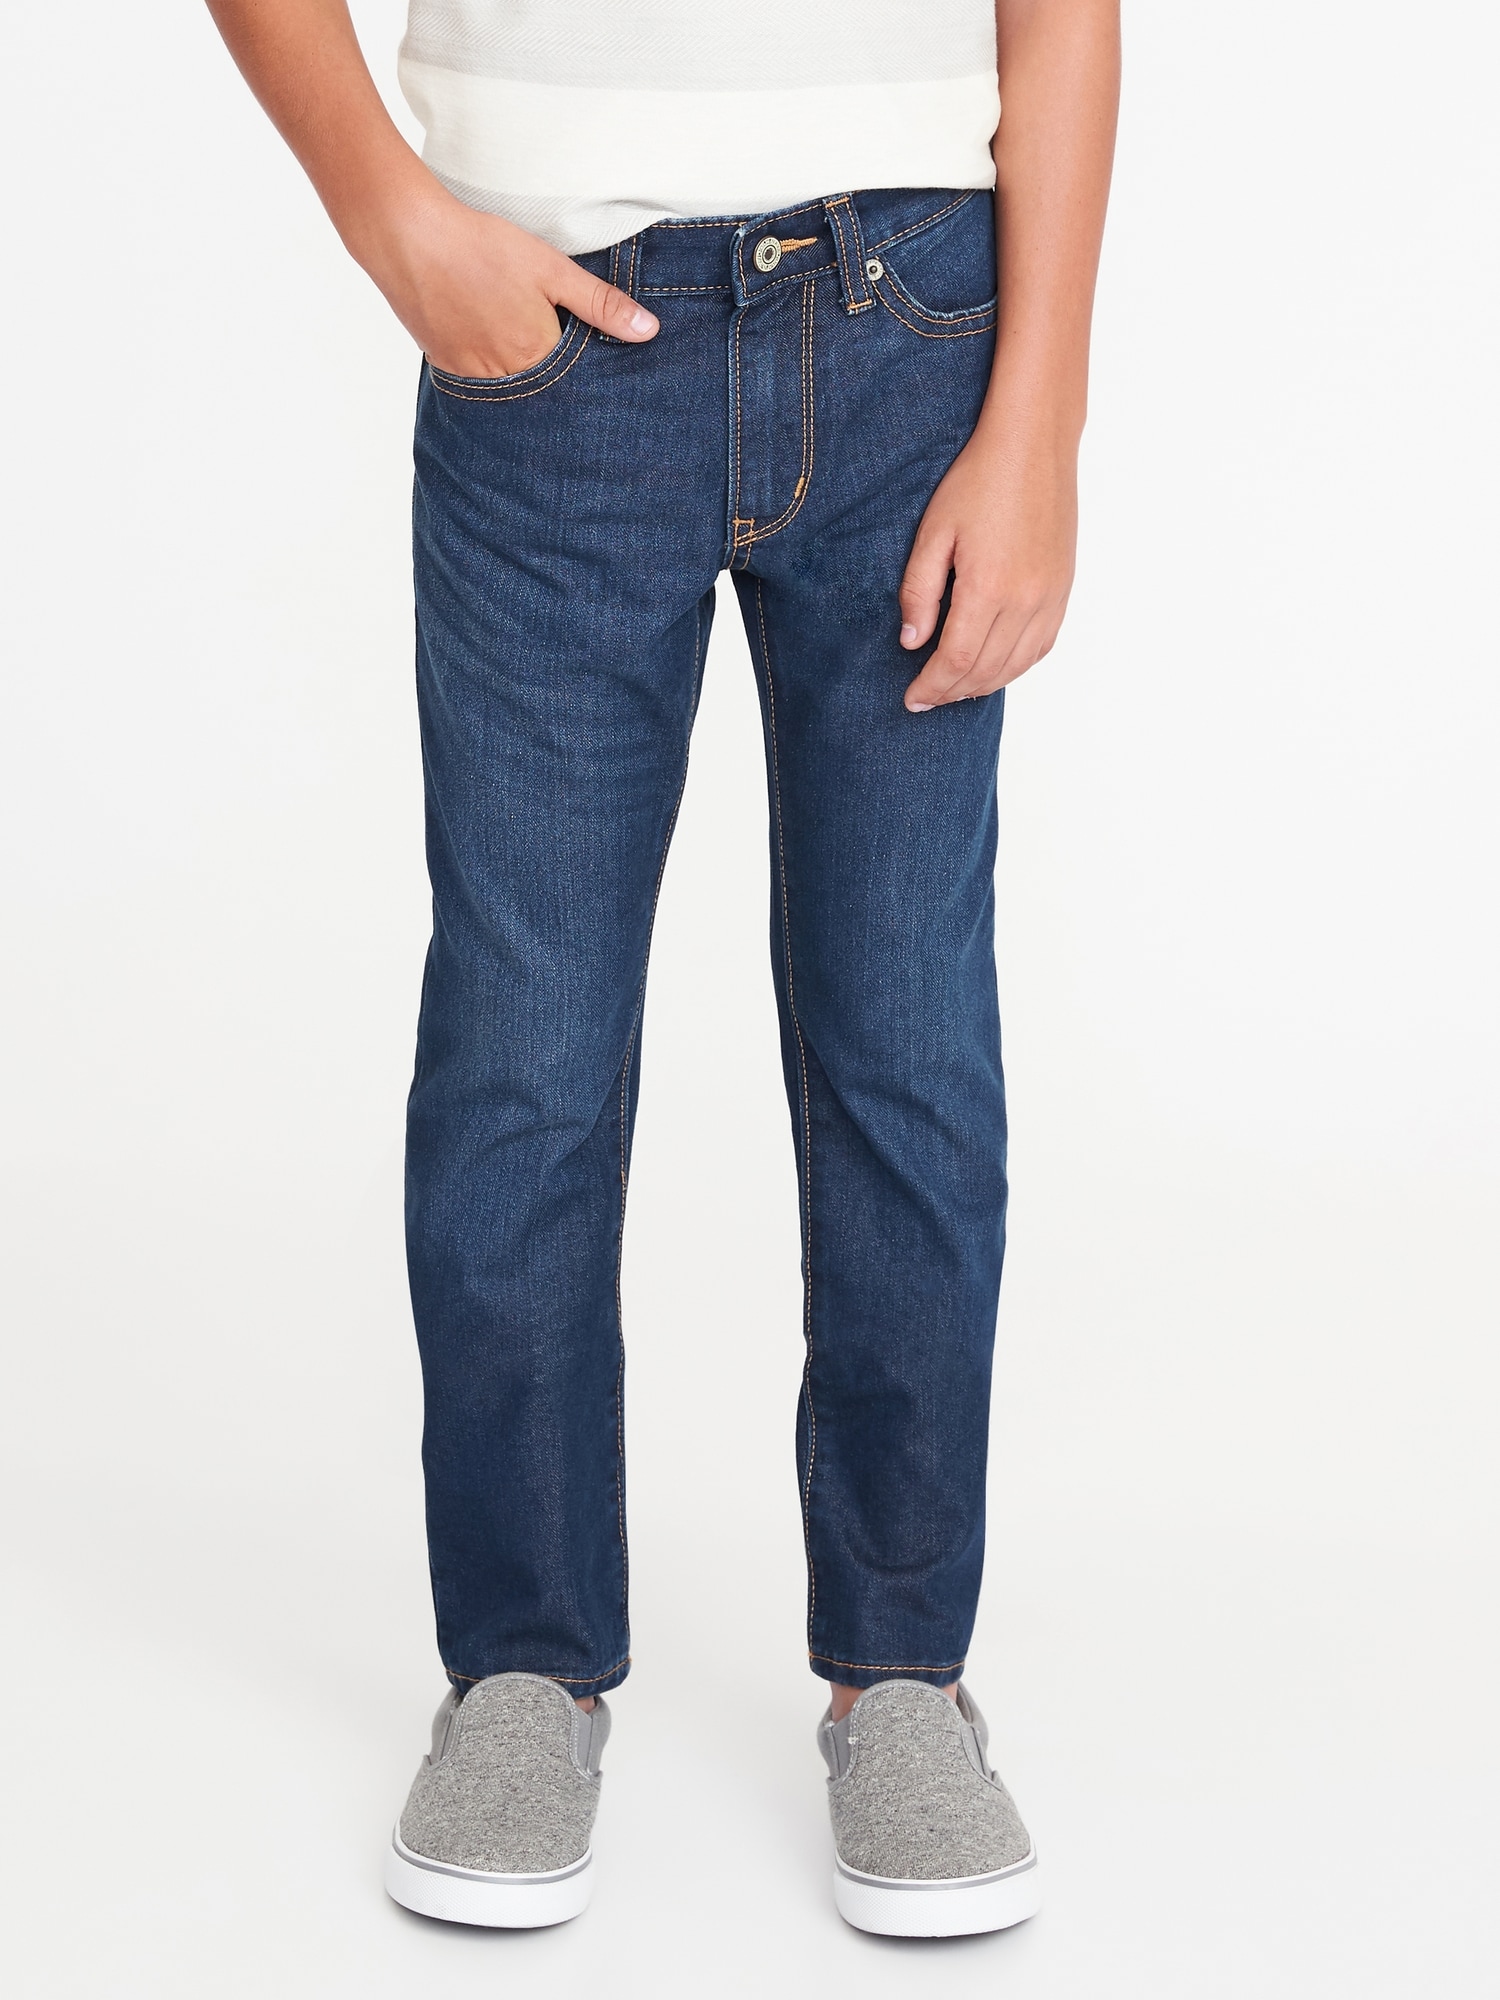 Boys Skinny Navy | Wow for Old Non-Stretch Jeans